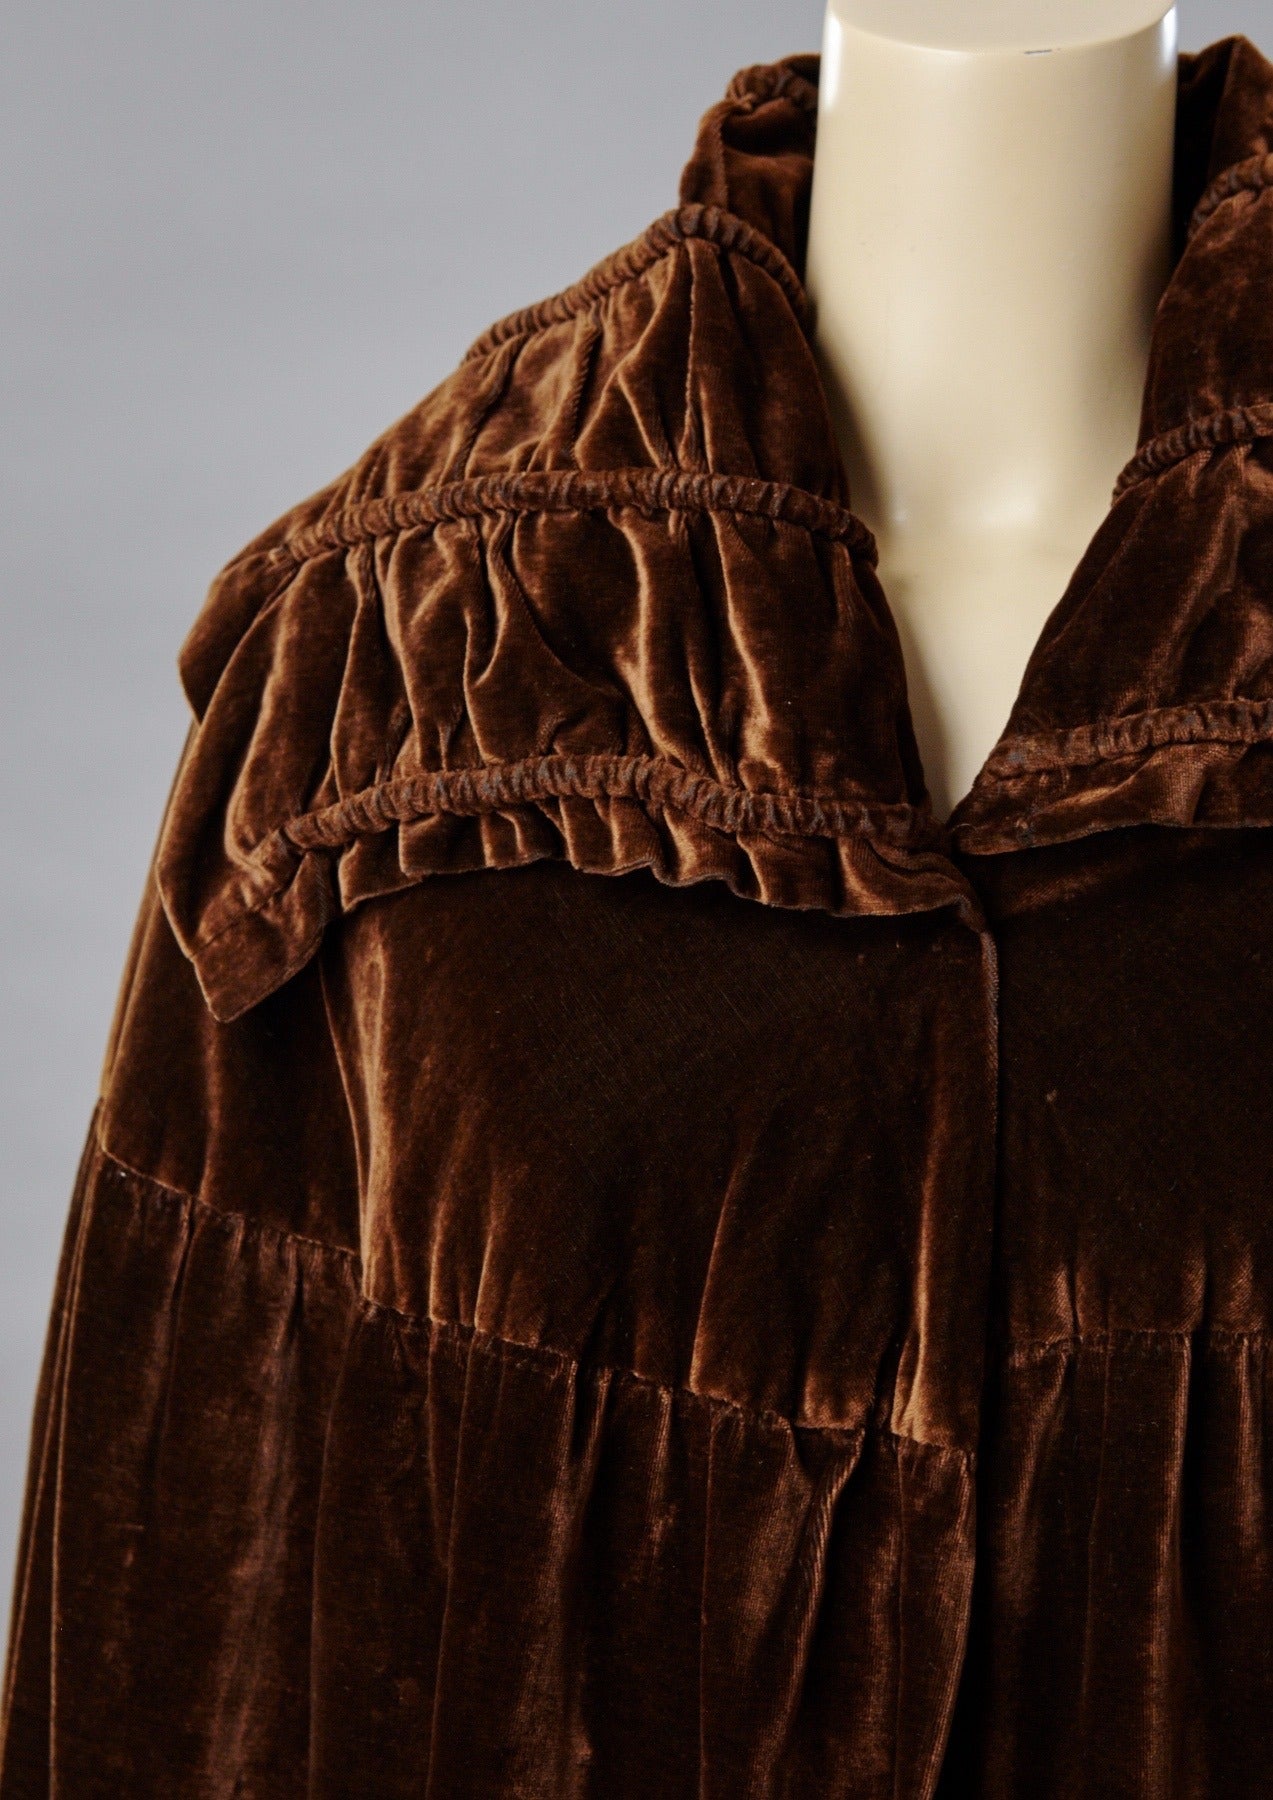 Summer, 1928 Haute Couture, Jeanne Paquin velvet evening cape lined in gold lamé. The collar is rolled and pleated and is about 9 inches wide. The body of the cape fits close to the shoulders. The fullness of the lower cape is gathered into the